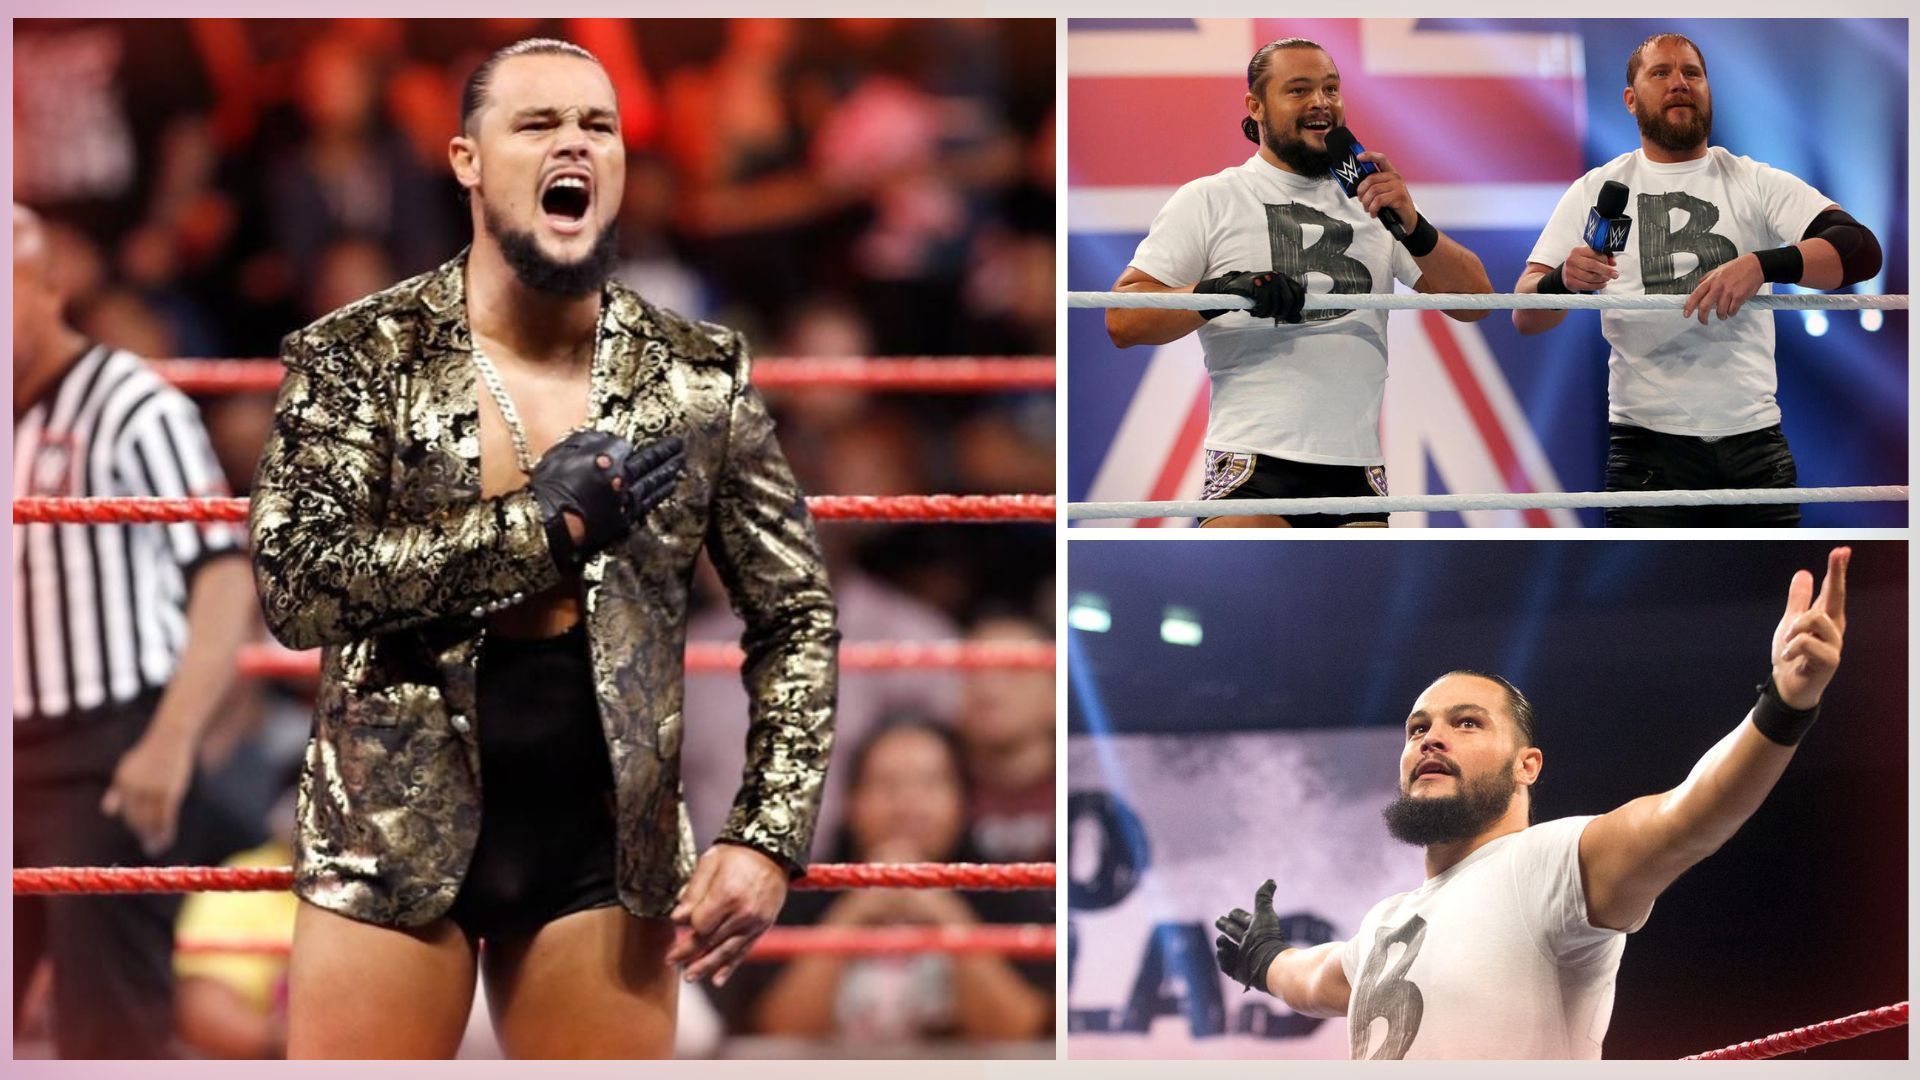 Former NXT Champion Bo Dallas confirmed that he